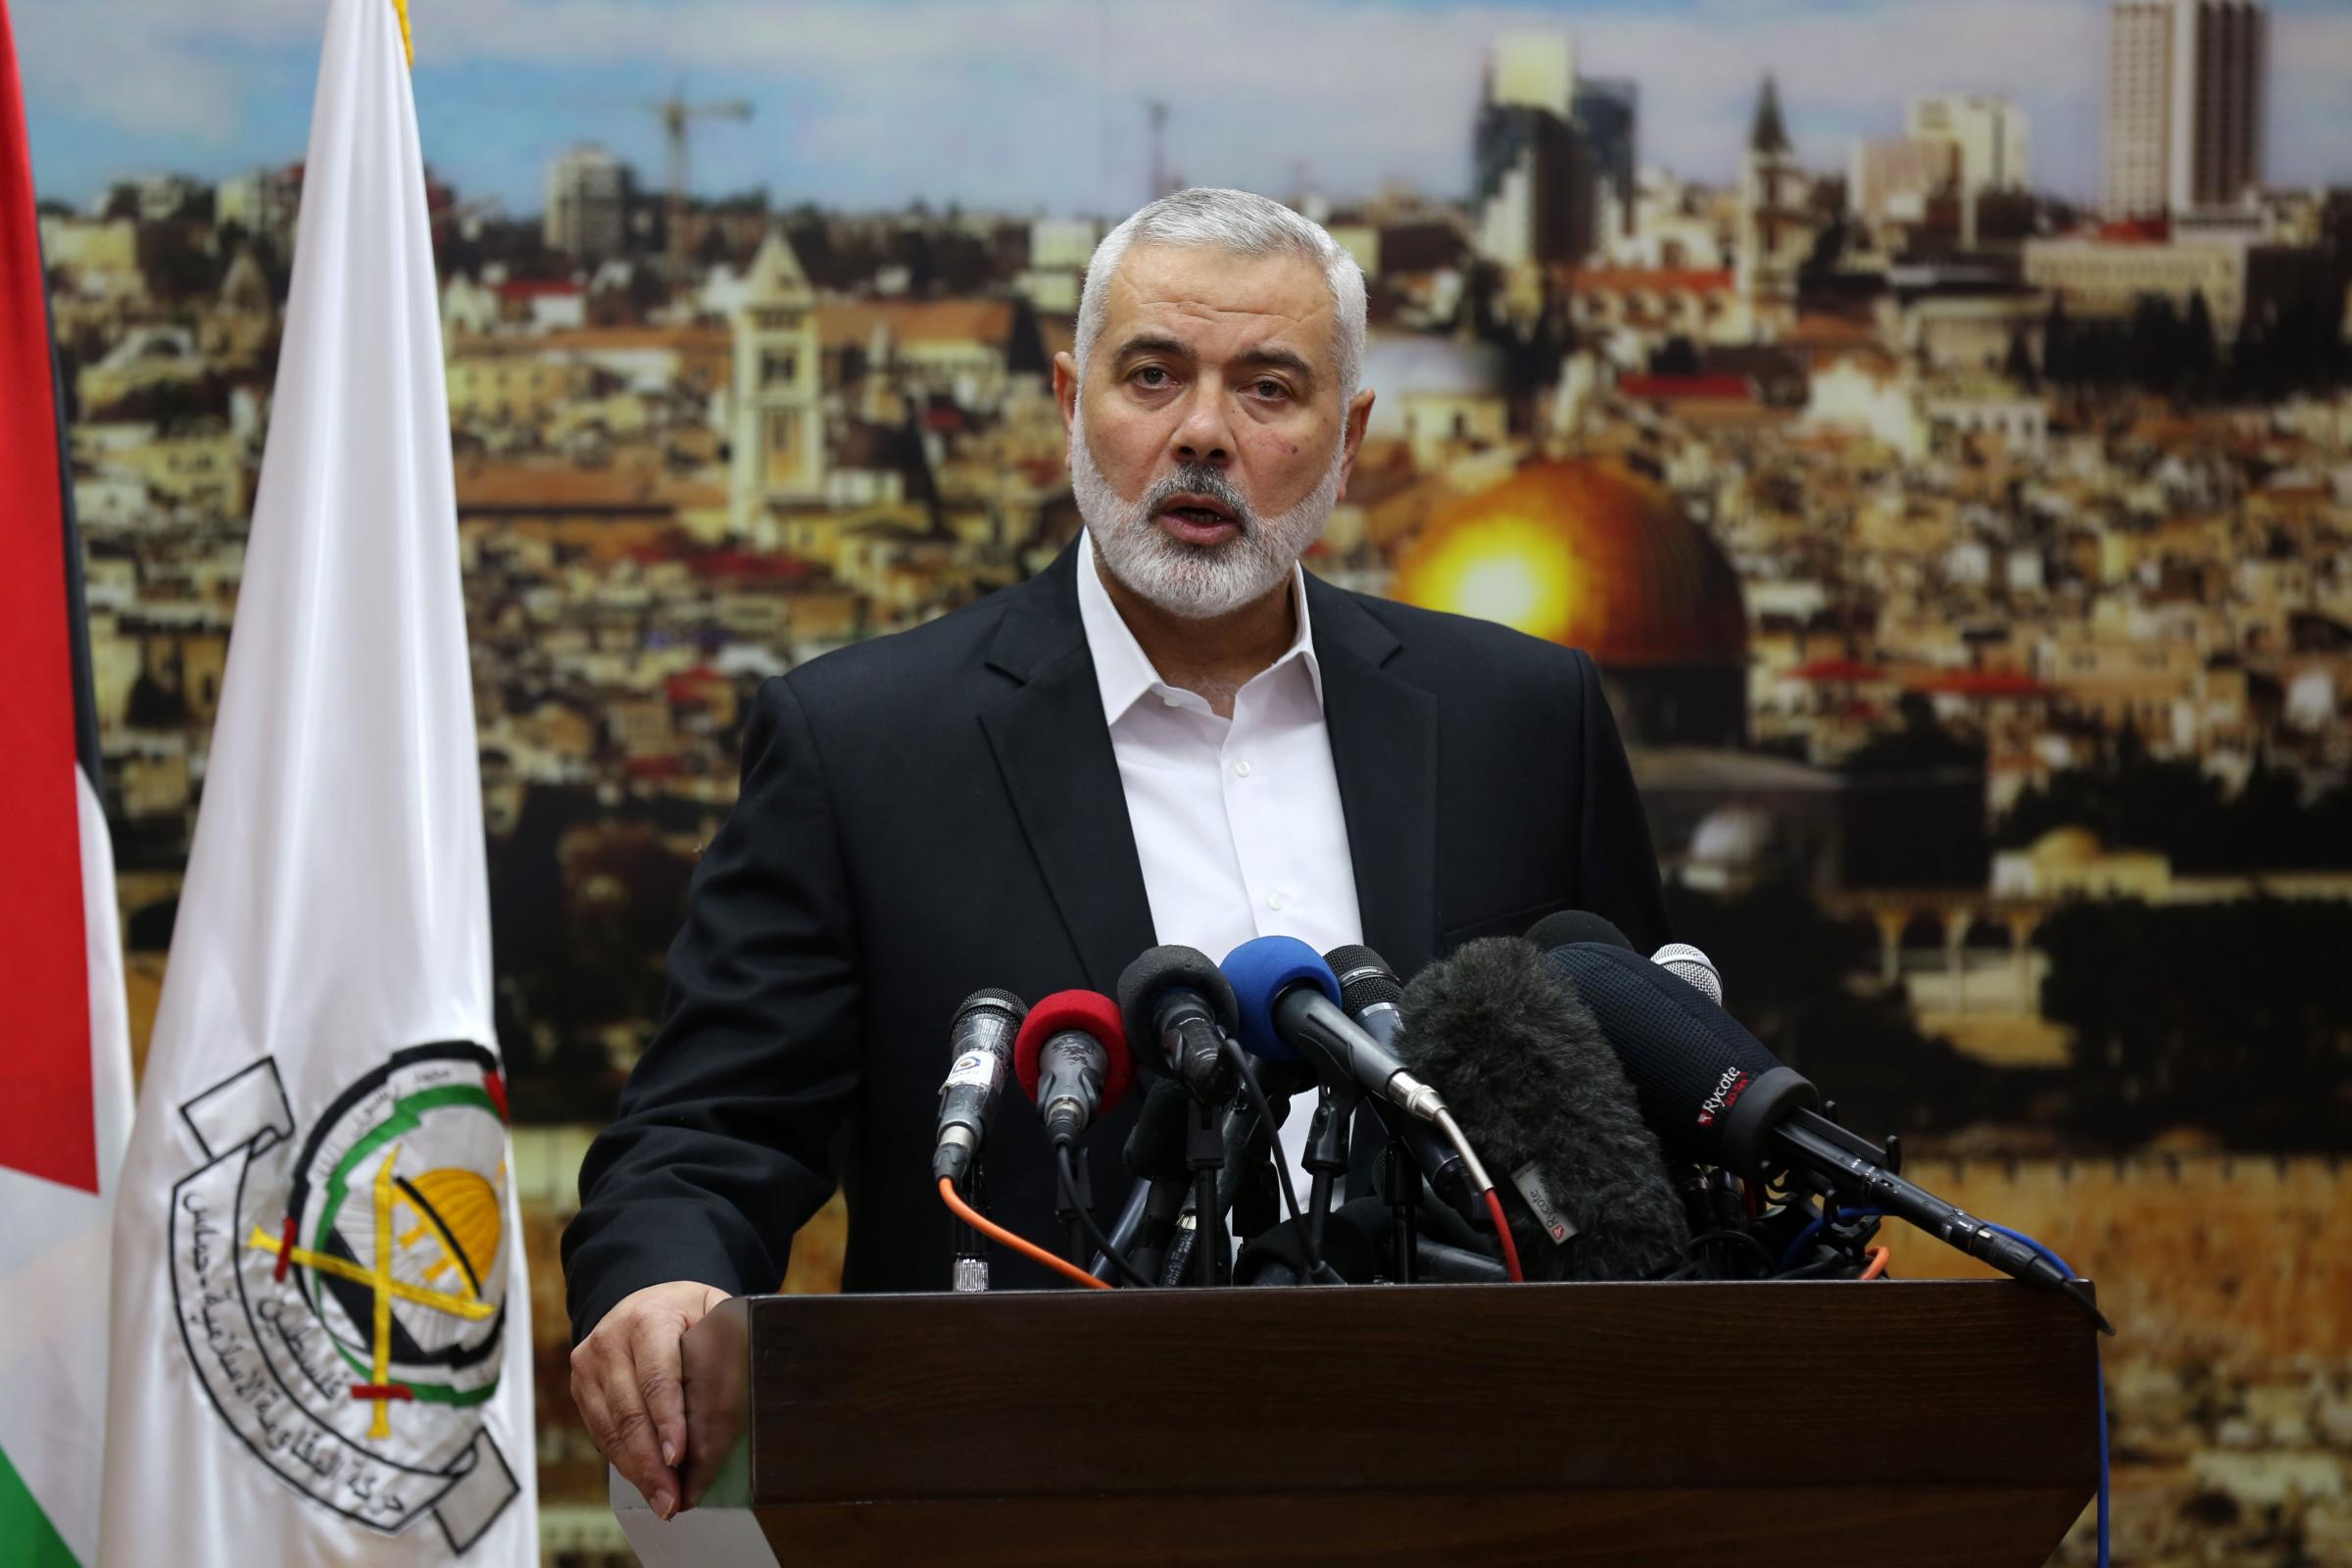 Hamas leader Ismail Haniya gestures as he delivers a speech over US President Donald Trumps decision to recognise Jerusalem as the capital of Israel, in Gaza City on December 7, 2017. Haniya called for a new Palestinian intifada, or uprising. This